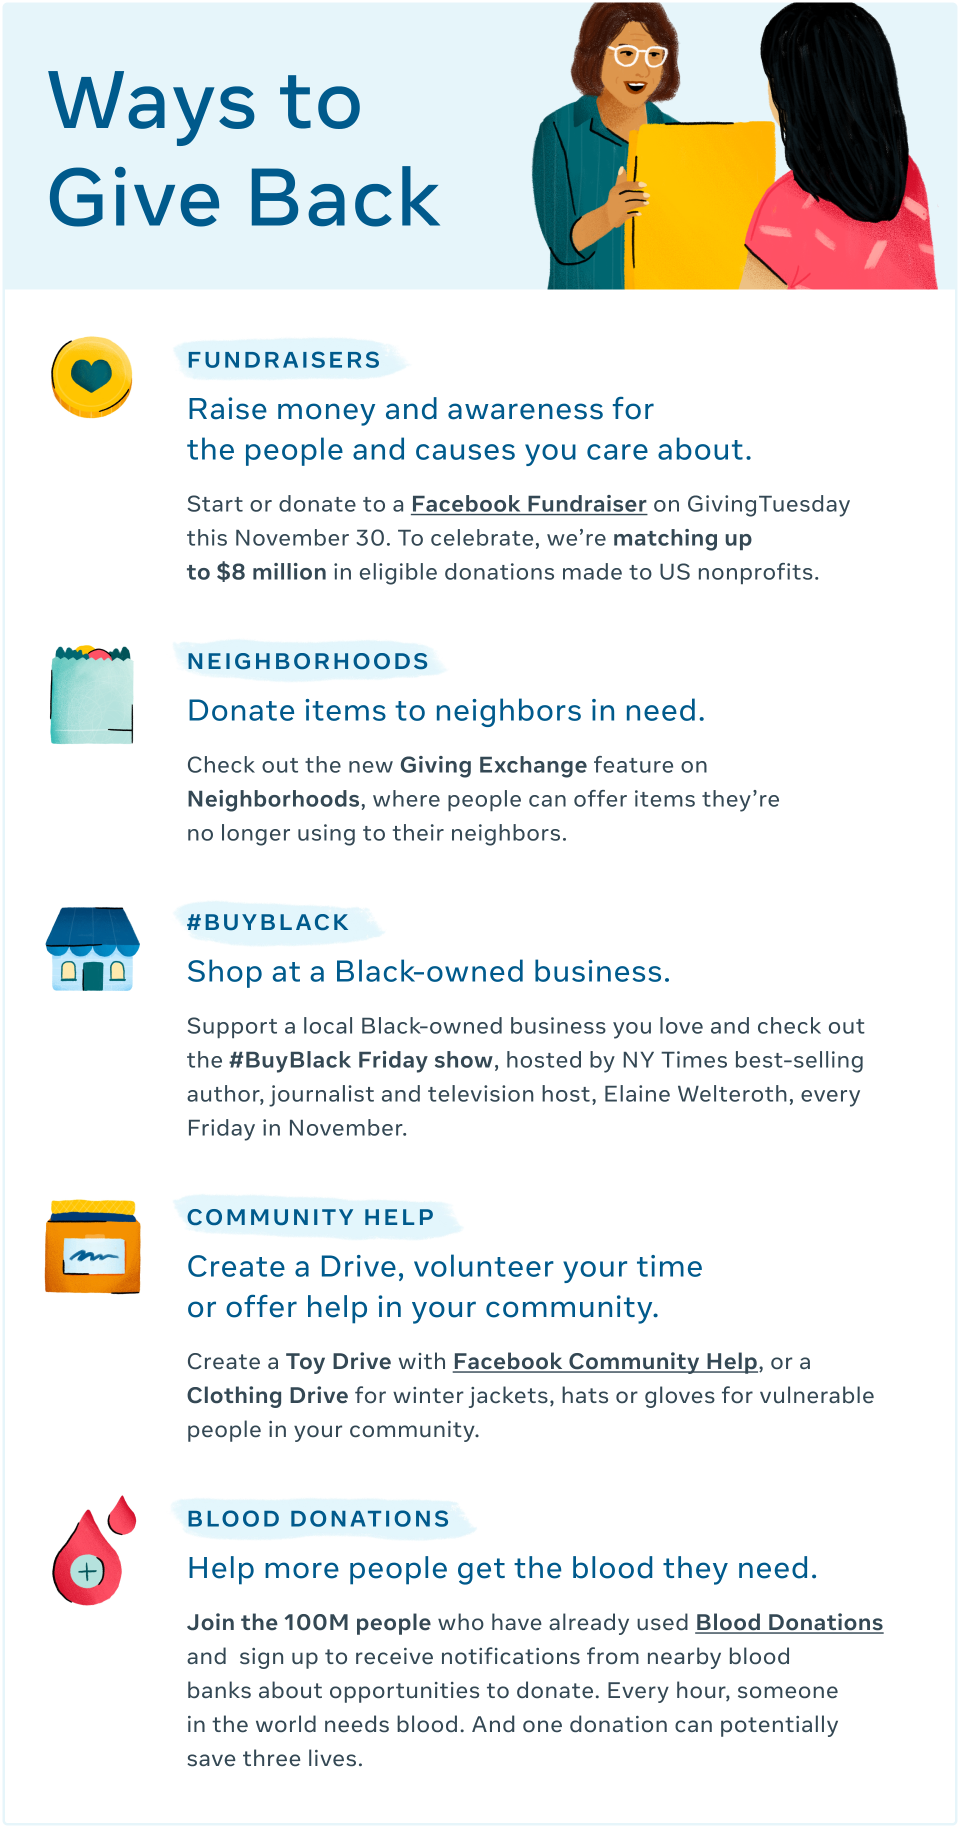 Infographic showing ways to give back